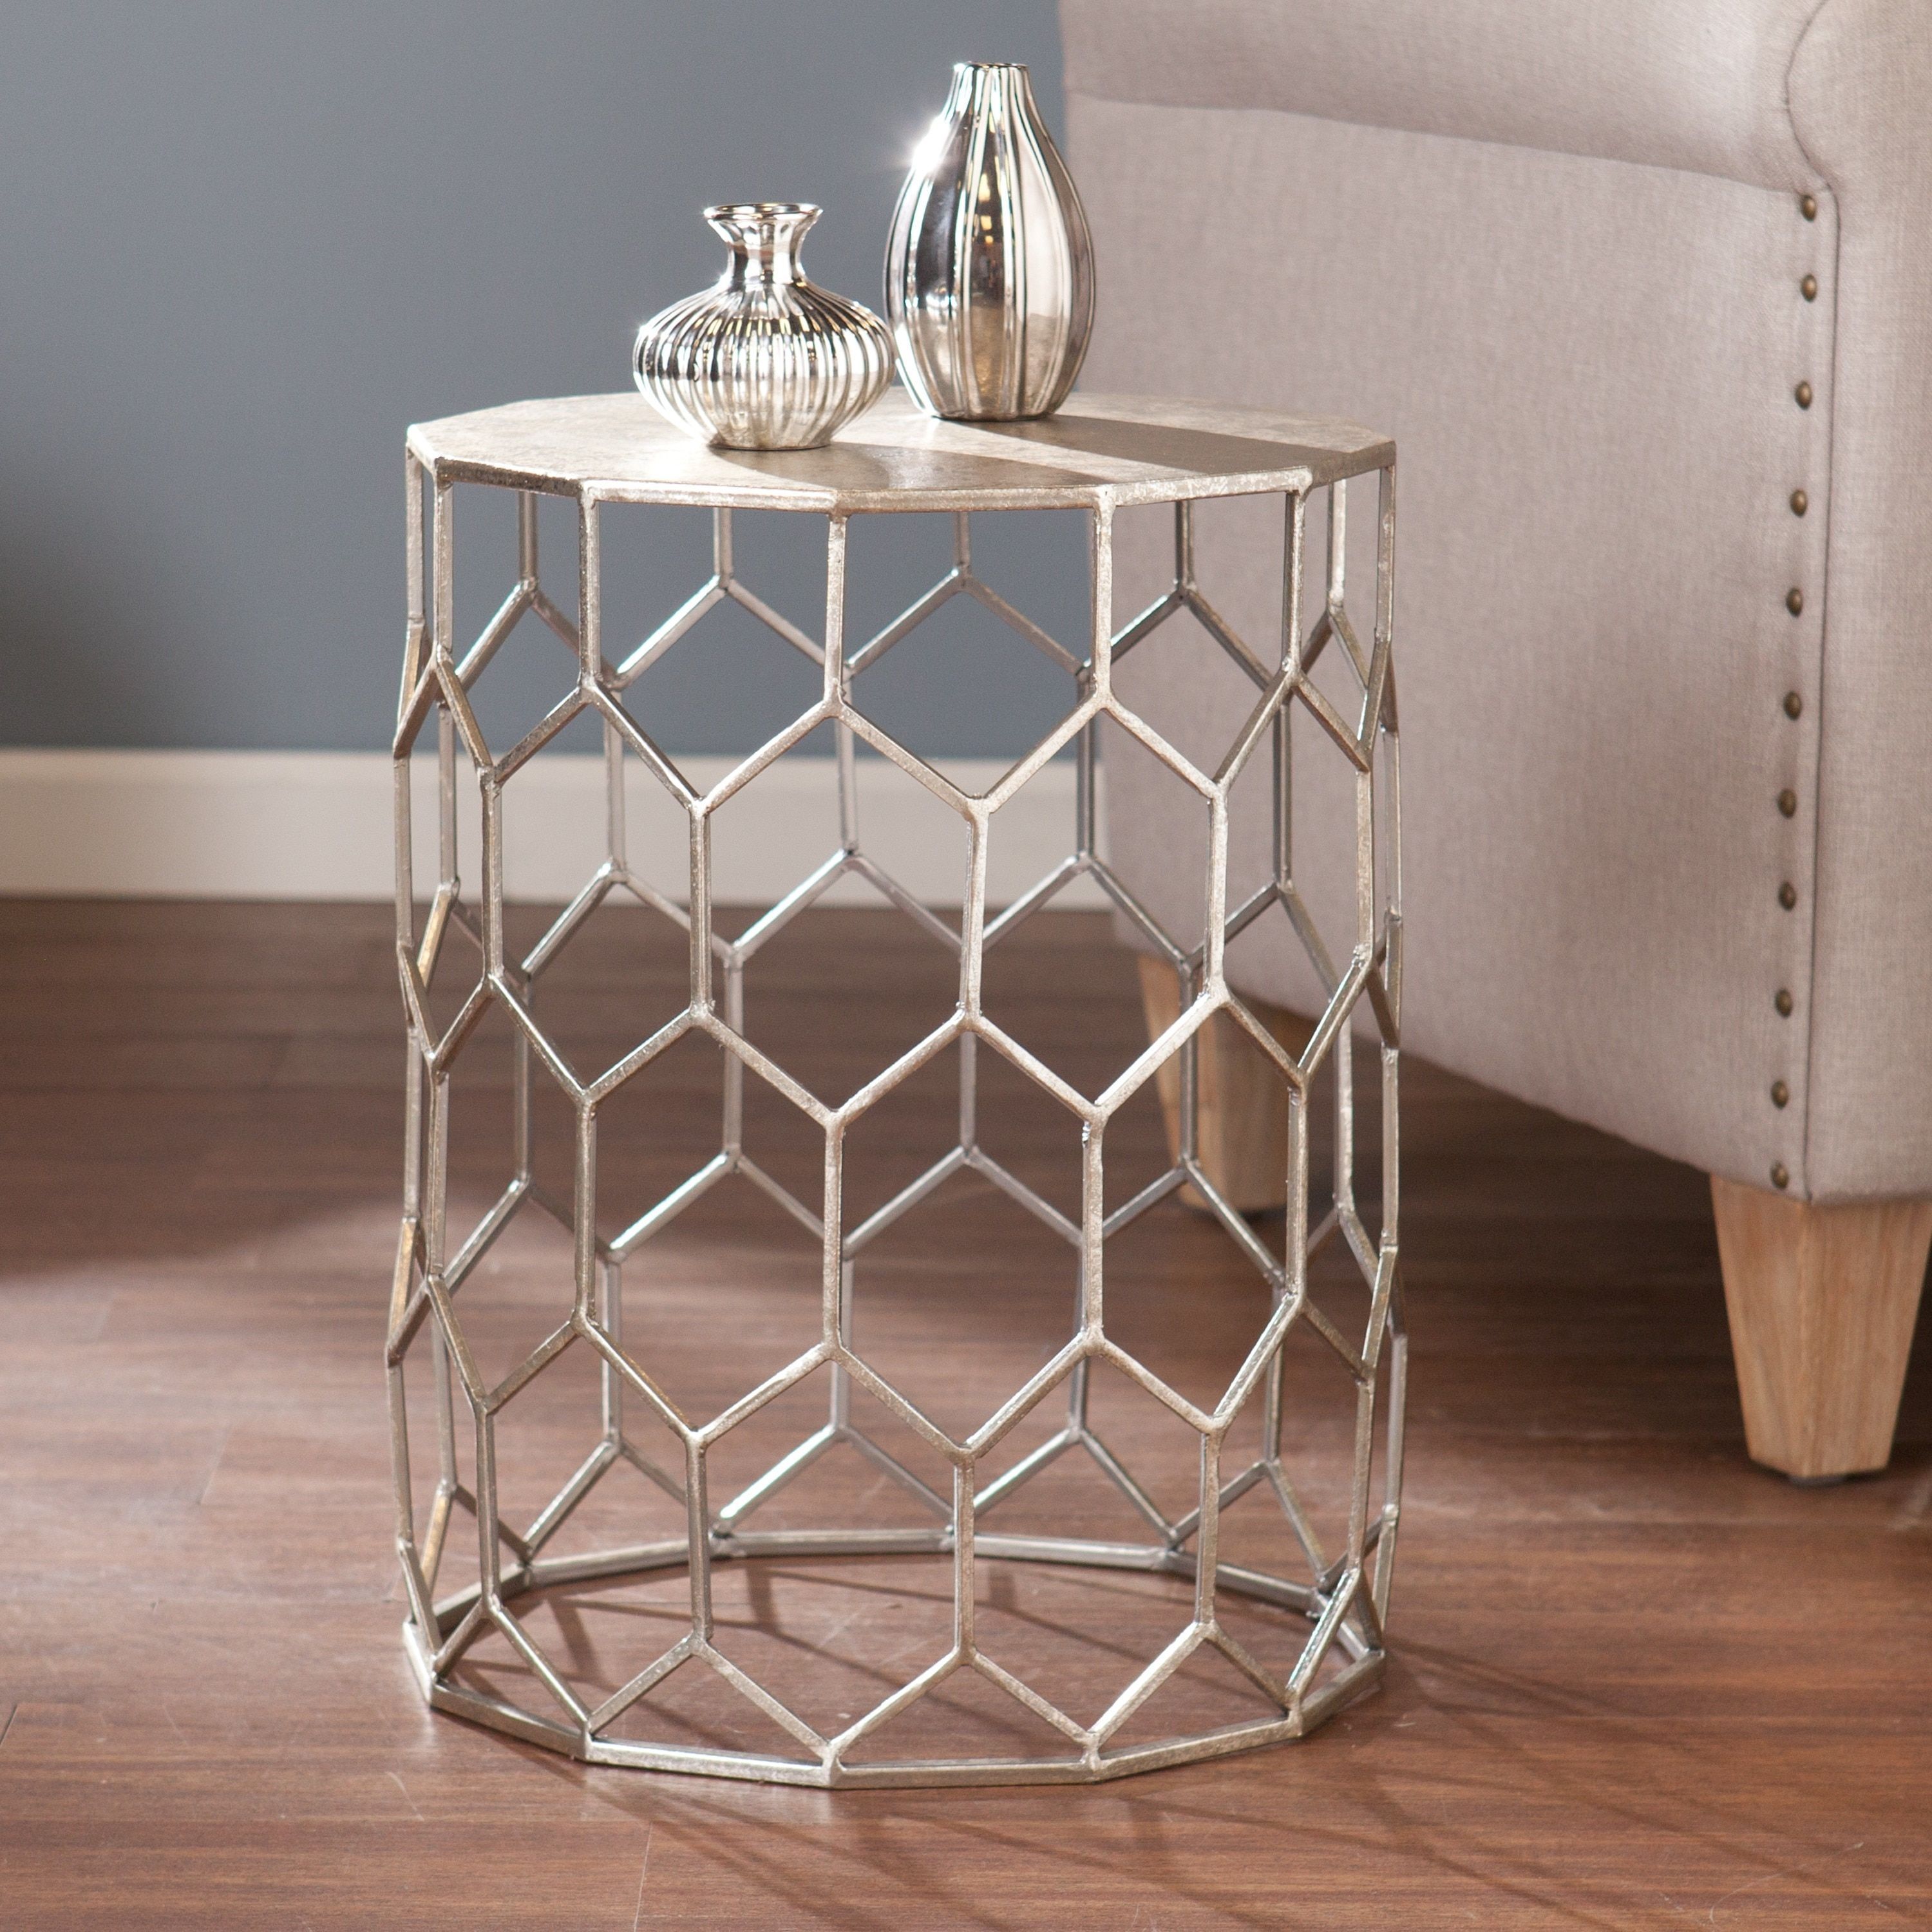 harper blvd christopher metal accent table silver outdoor furniture gold coast rustic coffee with wheels small oak laminate threshold bar pool umbrella stand fred meyer barn style